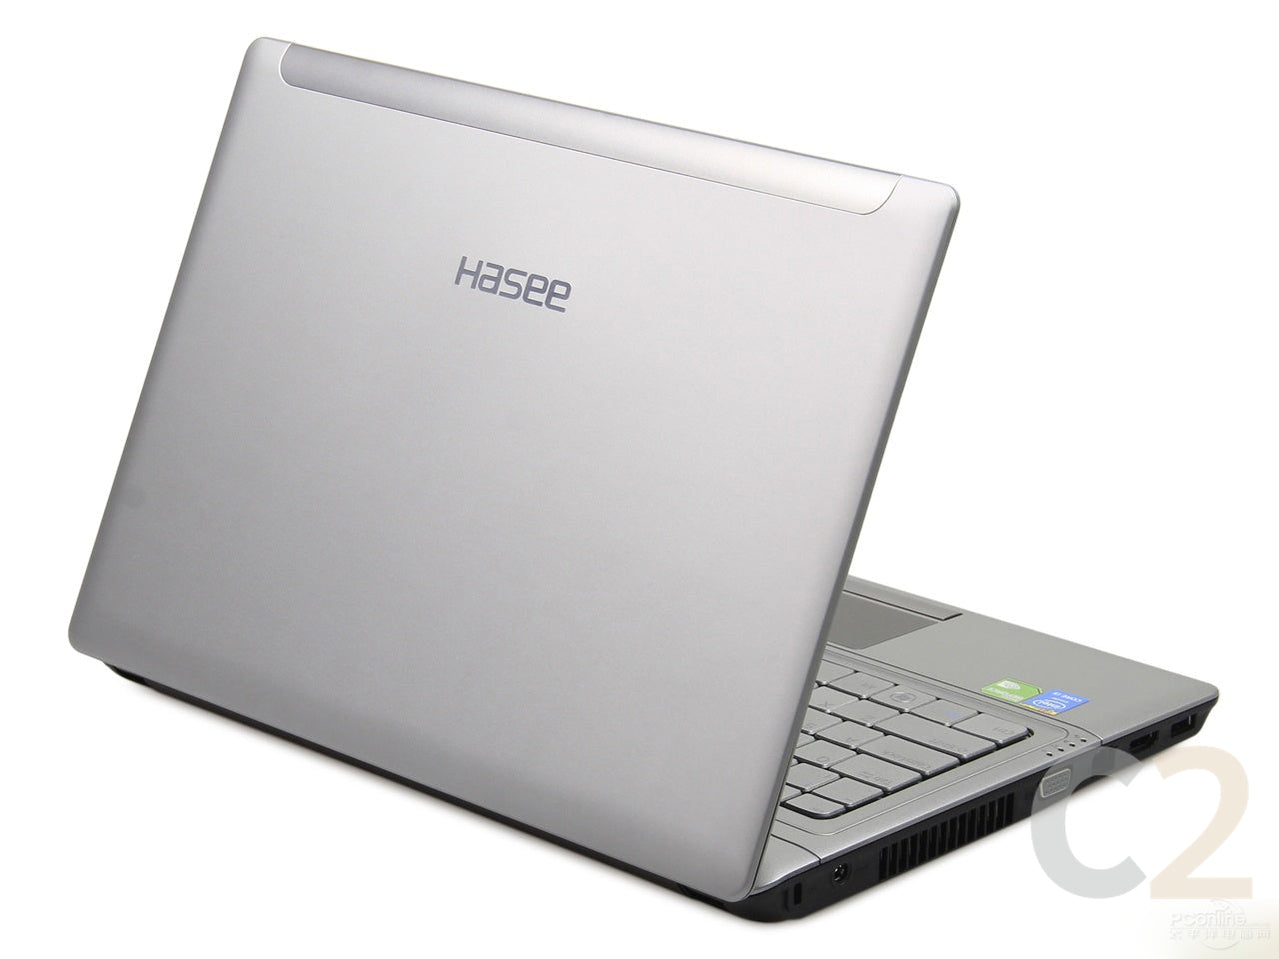 (二手) HASEE GOD OF WAR(神舟-戰神) K540D i5-4210M 4G NA 500G GT 940 2G 14" 1920×1080  Entry Gaming Laptop 入門遊戲本 90% NEW - C2 Computer